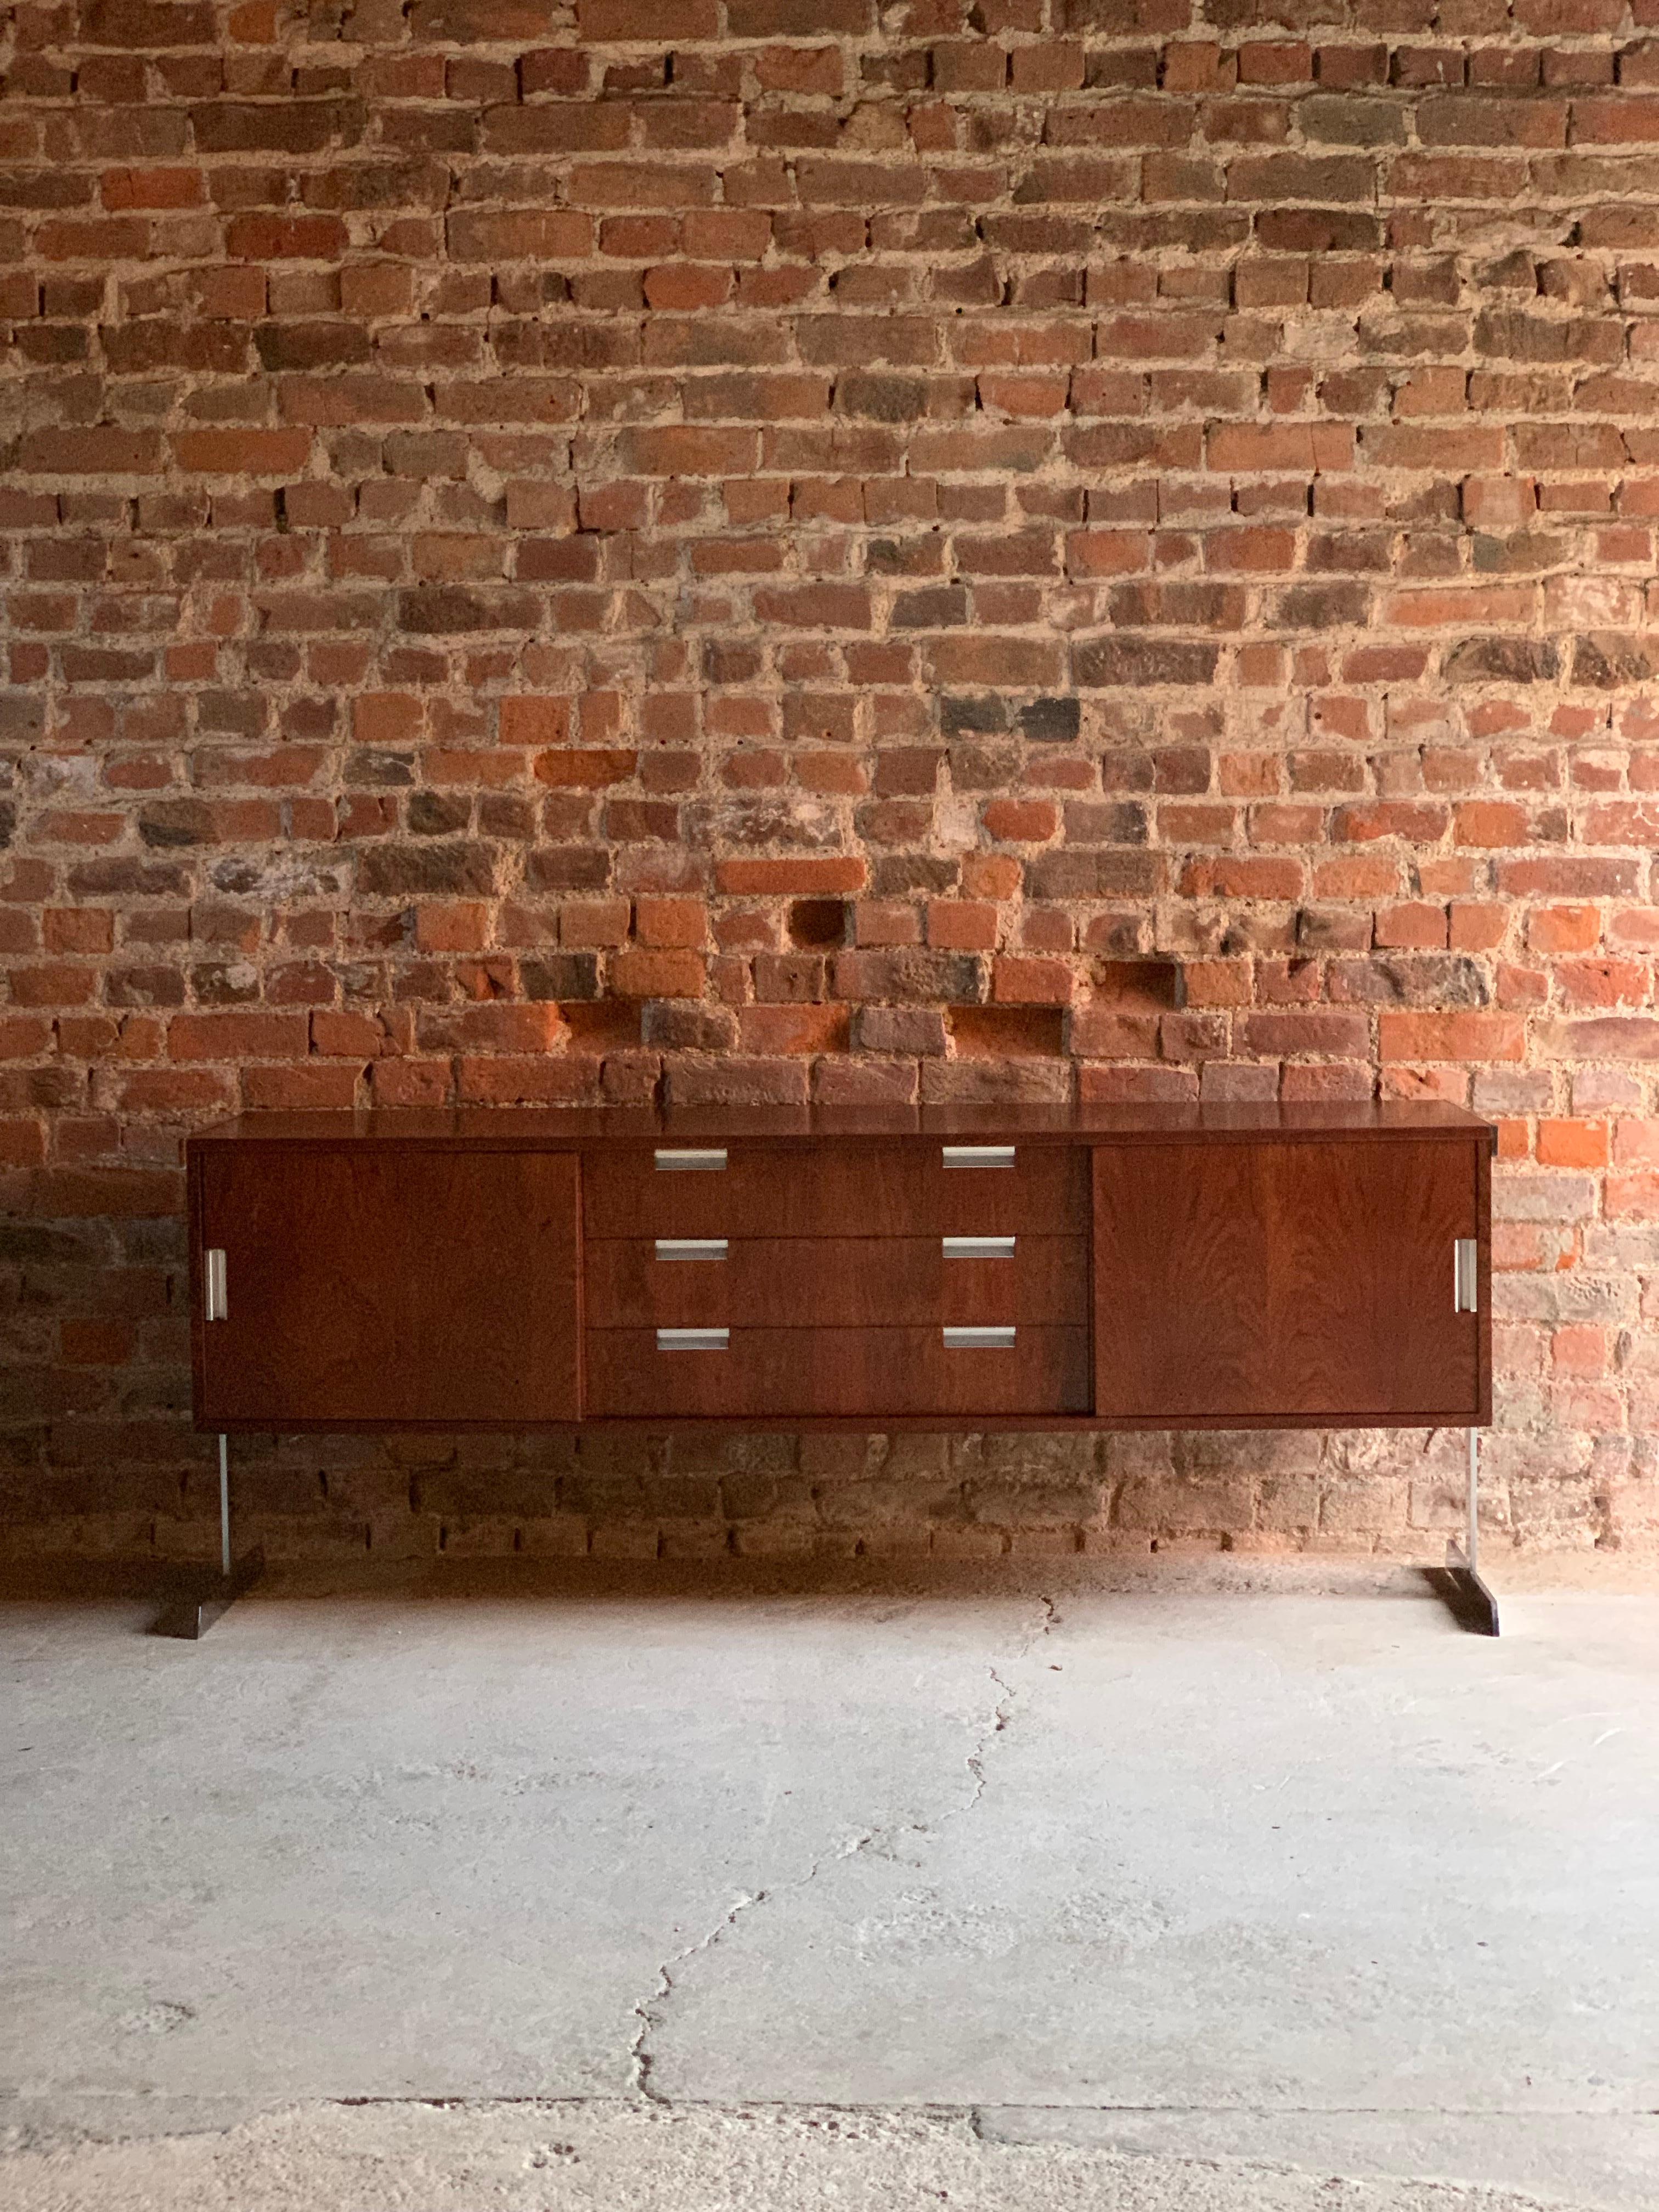 When it comes to coolness in the British furniture world one name stands out above all others and that’s Merrow Associates, our version of Knoll Studio, this super slick, elegant and seriously sought after Merrow Associates sideboard dates to the